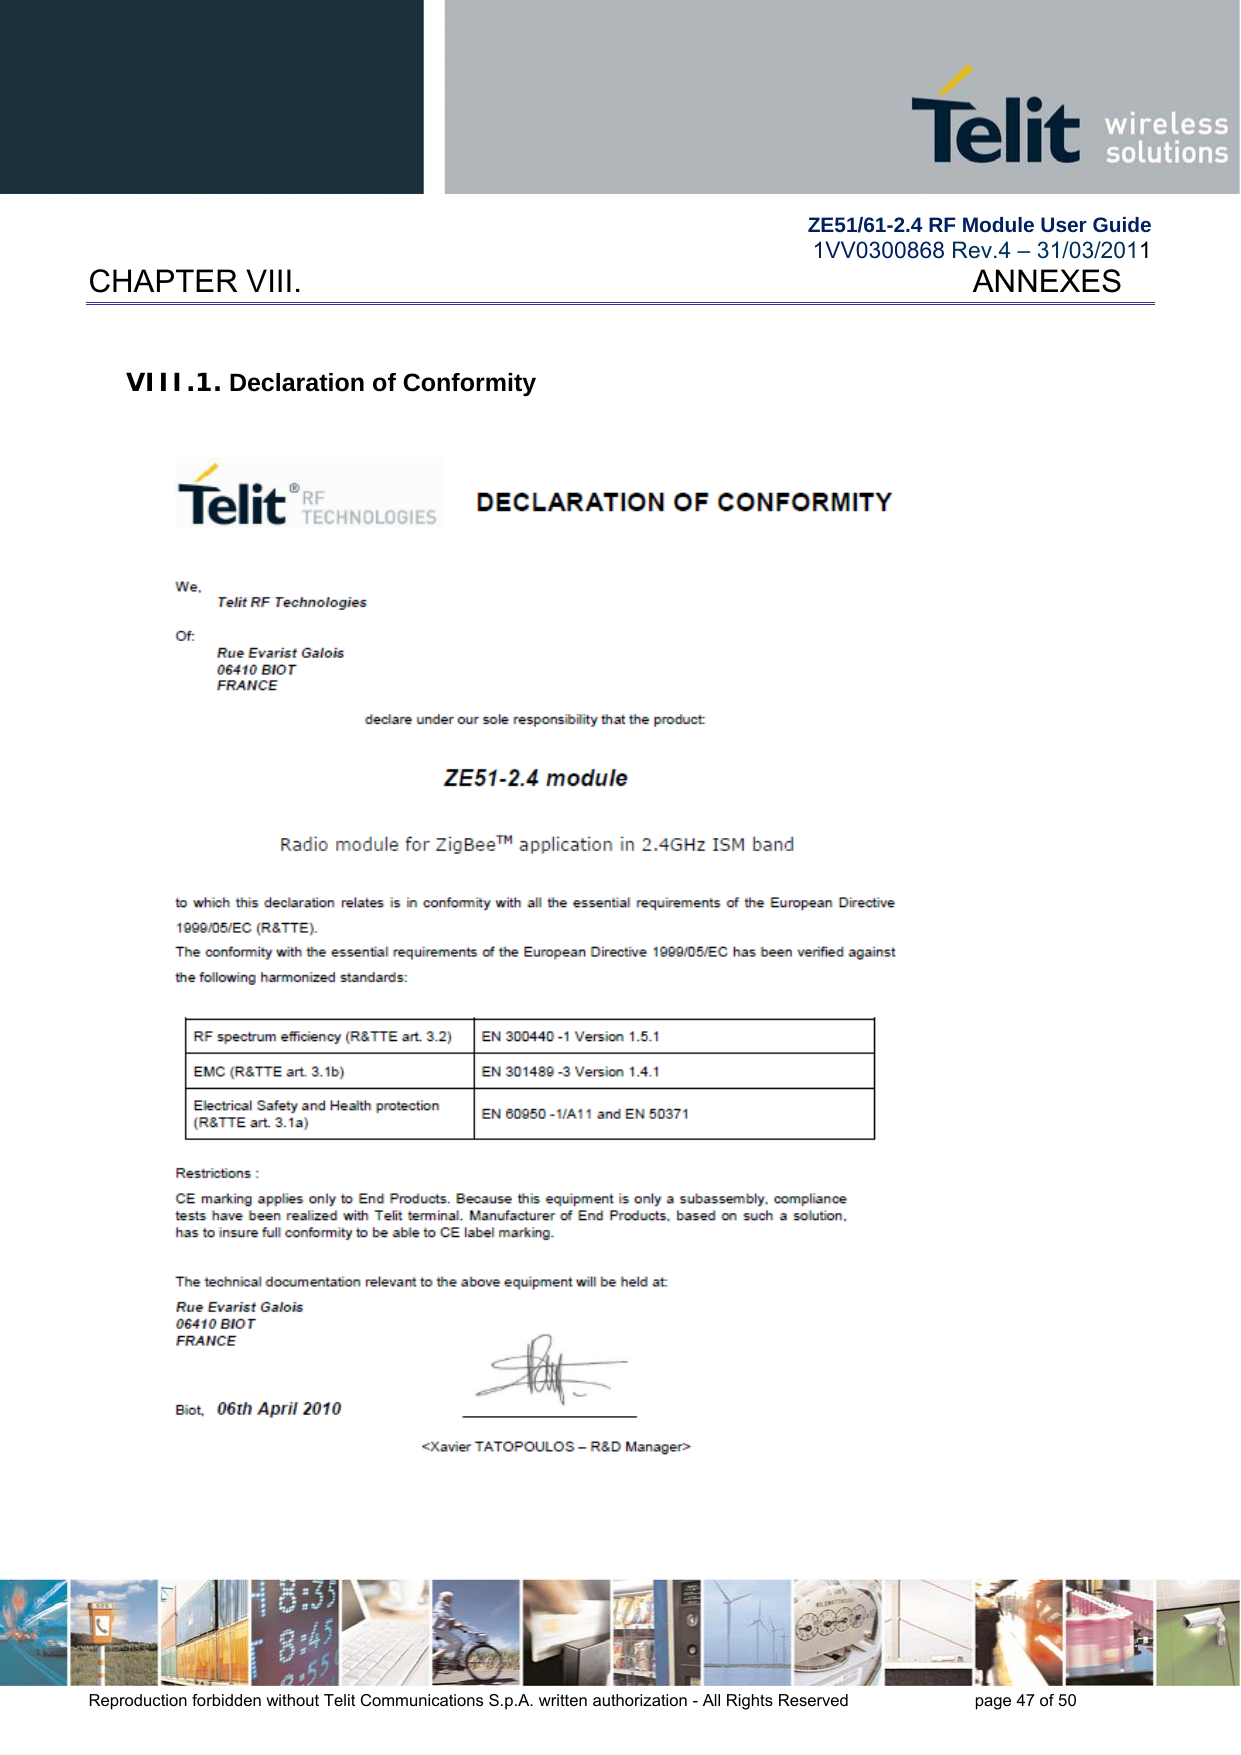        ZE51/61-2.4 RF Module User Guide 1VV0300868 Rev.4 – 31/03/2011 Reproduction forbidden without Telit Communications S.p.A. written authorization - All Rights Reserved    page 47 of 50 CHAPTER VIII.   ANNEXES VIII.1. Declaration of Conformity   